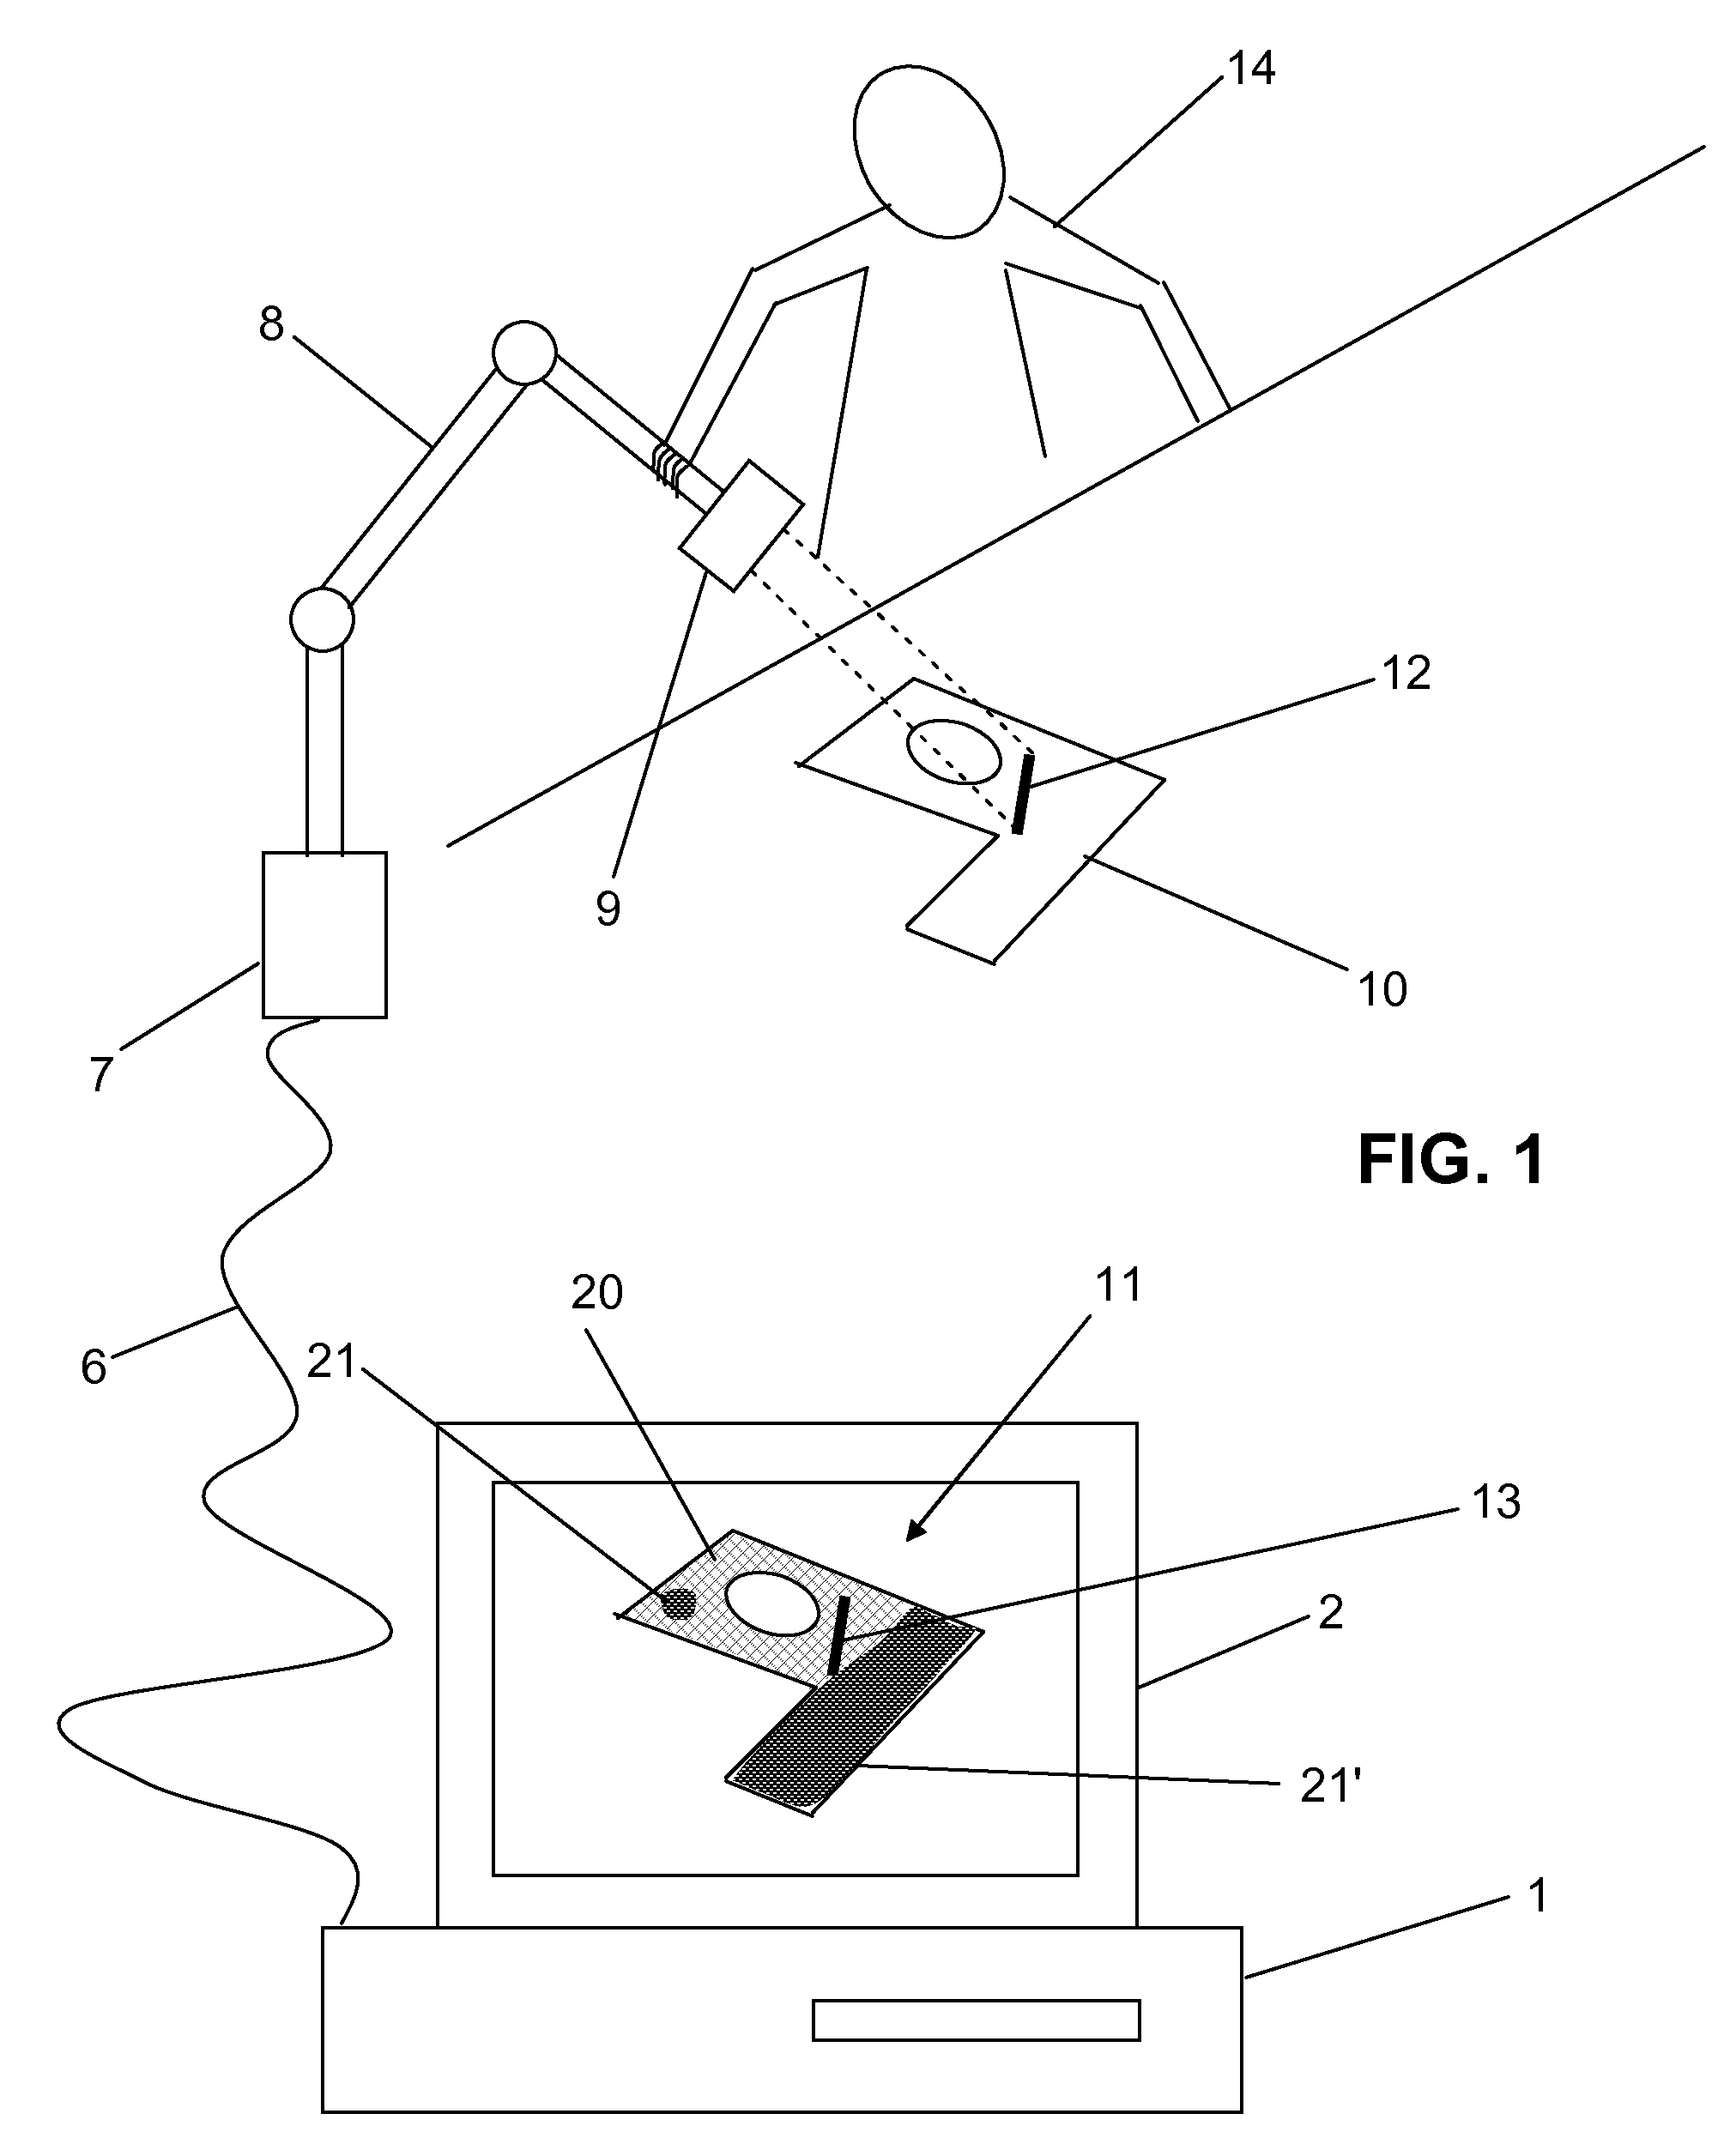 Method and computer program for improving the dimensional acquisition of an object